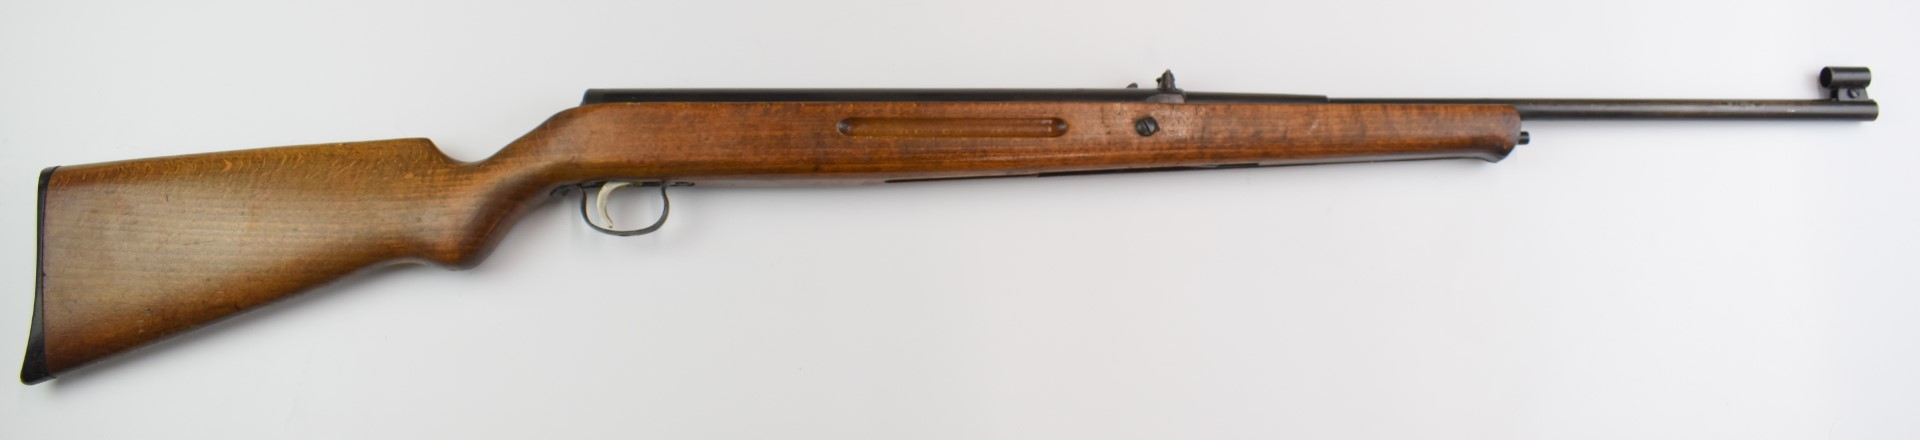 Original Mod 50E .22 under-lever air rifle with semi-pistol grip and adjustable sights and - Image 2 of 10